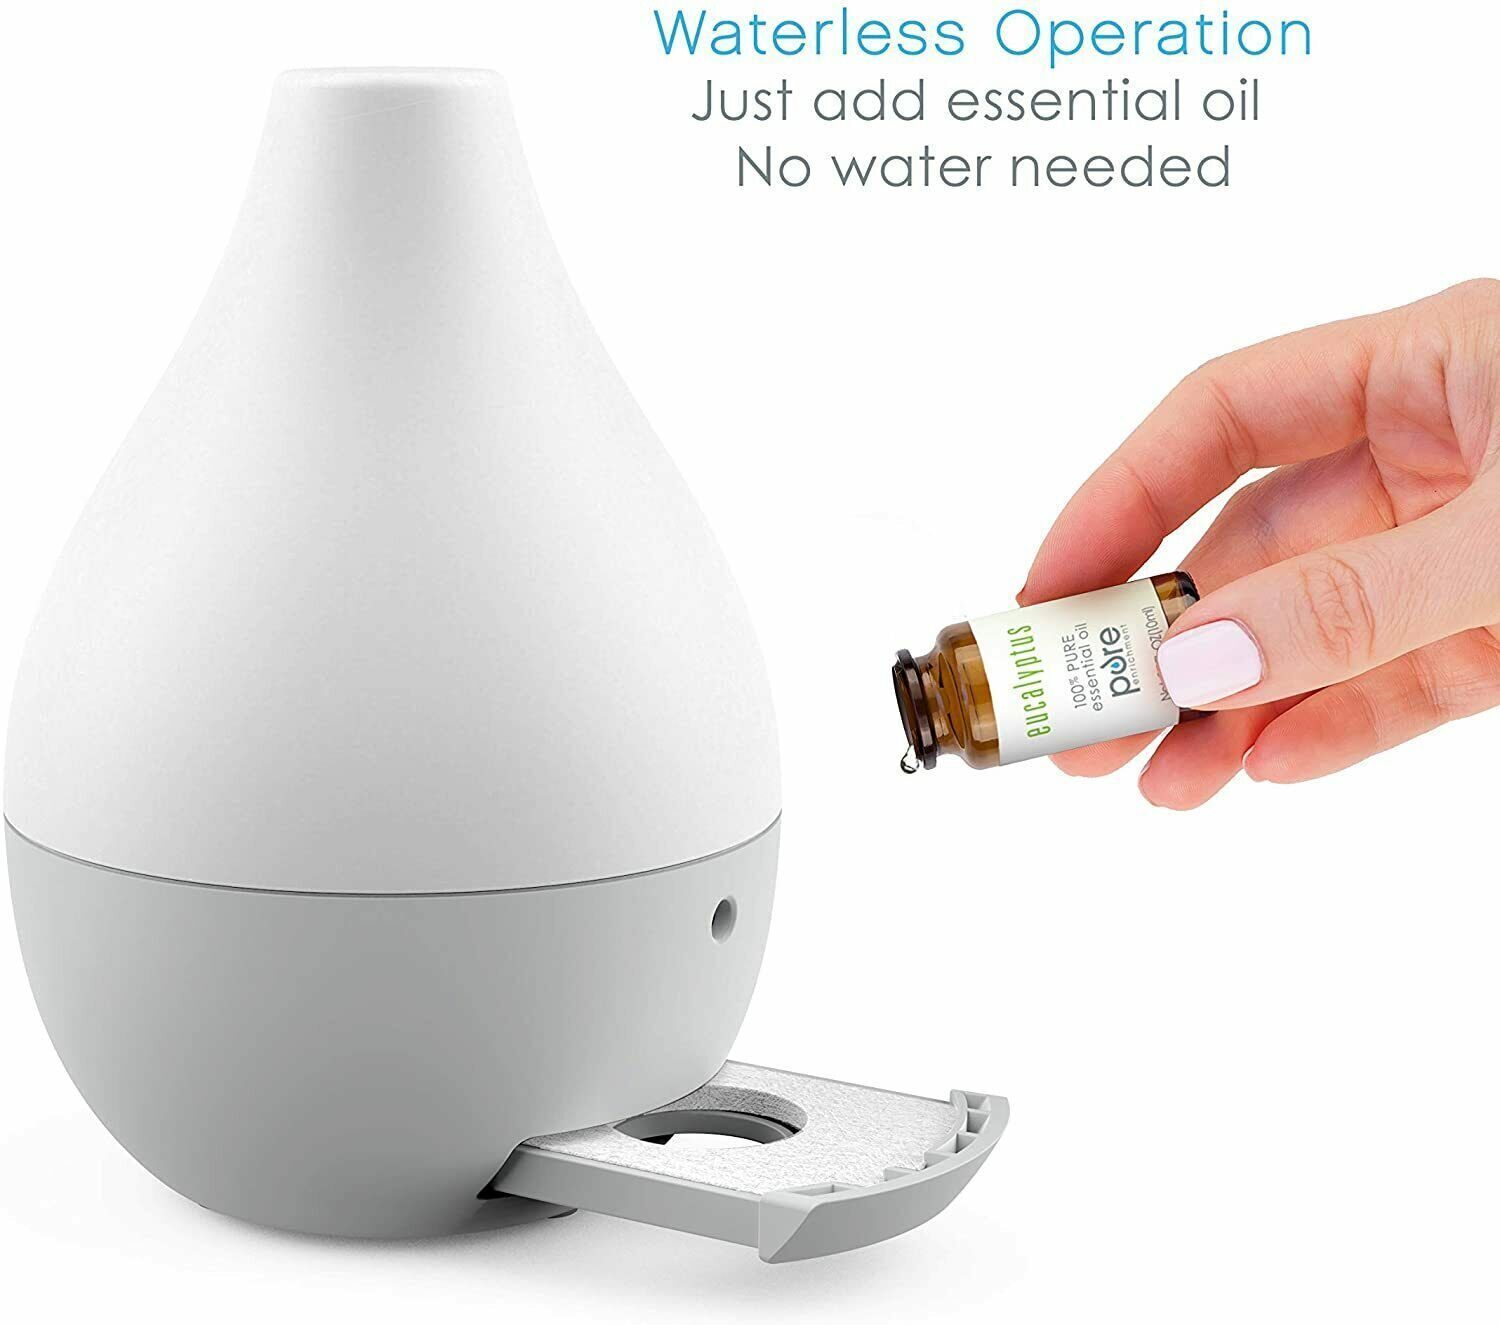 A hand applying essential oil to an Oil Diffuser SpyCam.